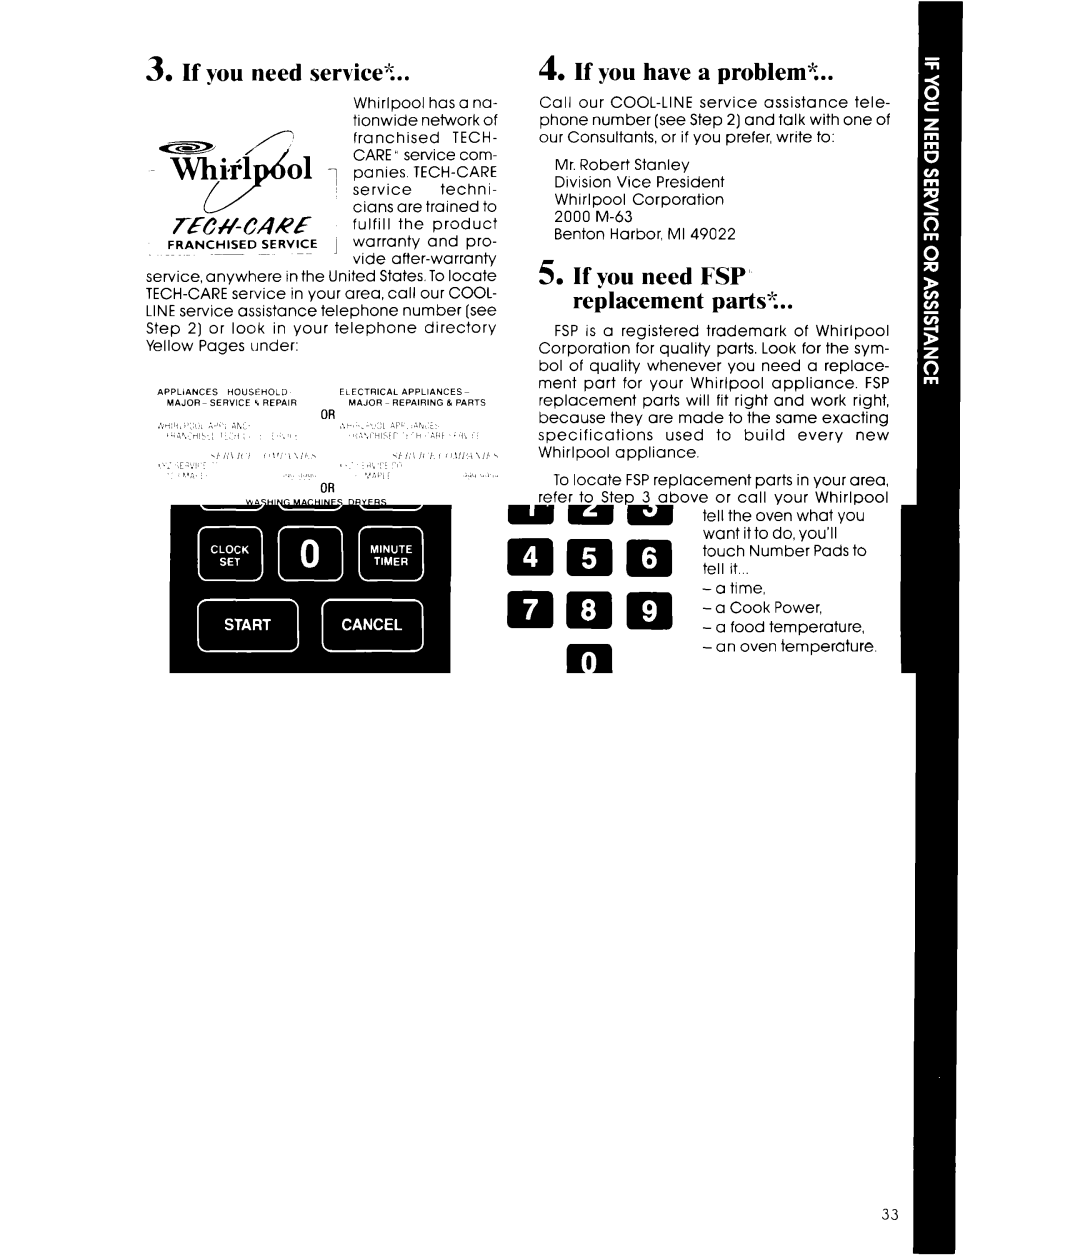 Whirlpool MCB790XT manual If you need service?, If you have a problem?, Tech-Care 